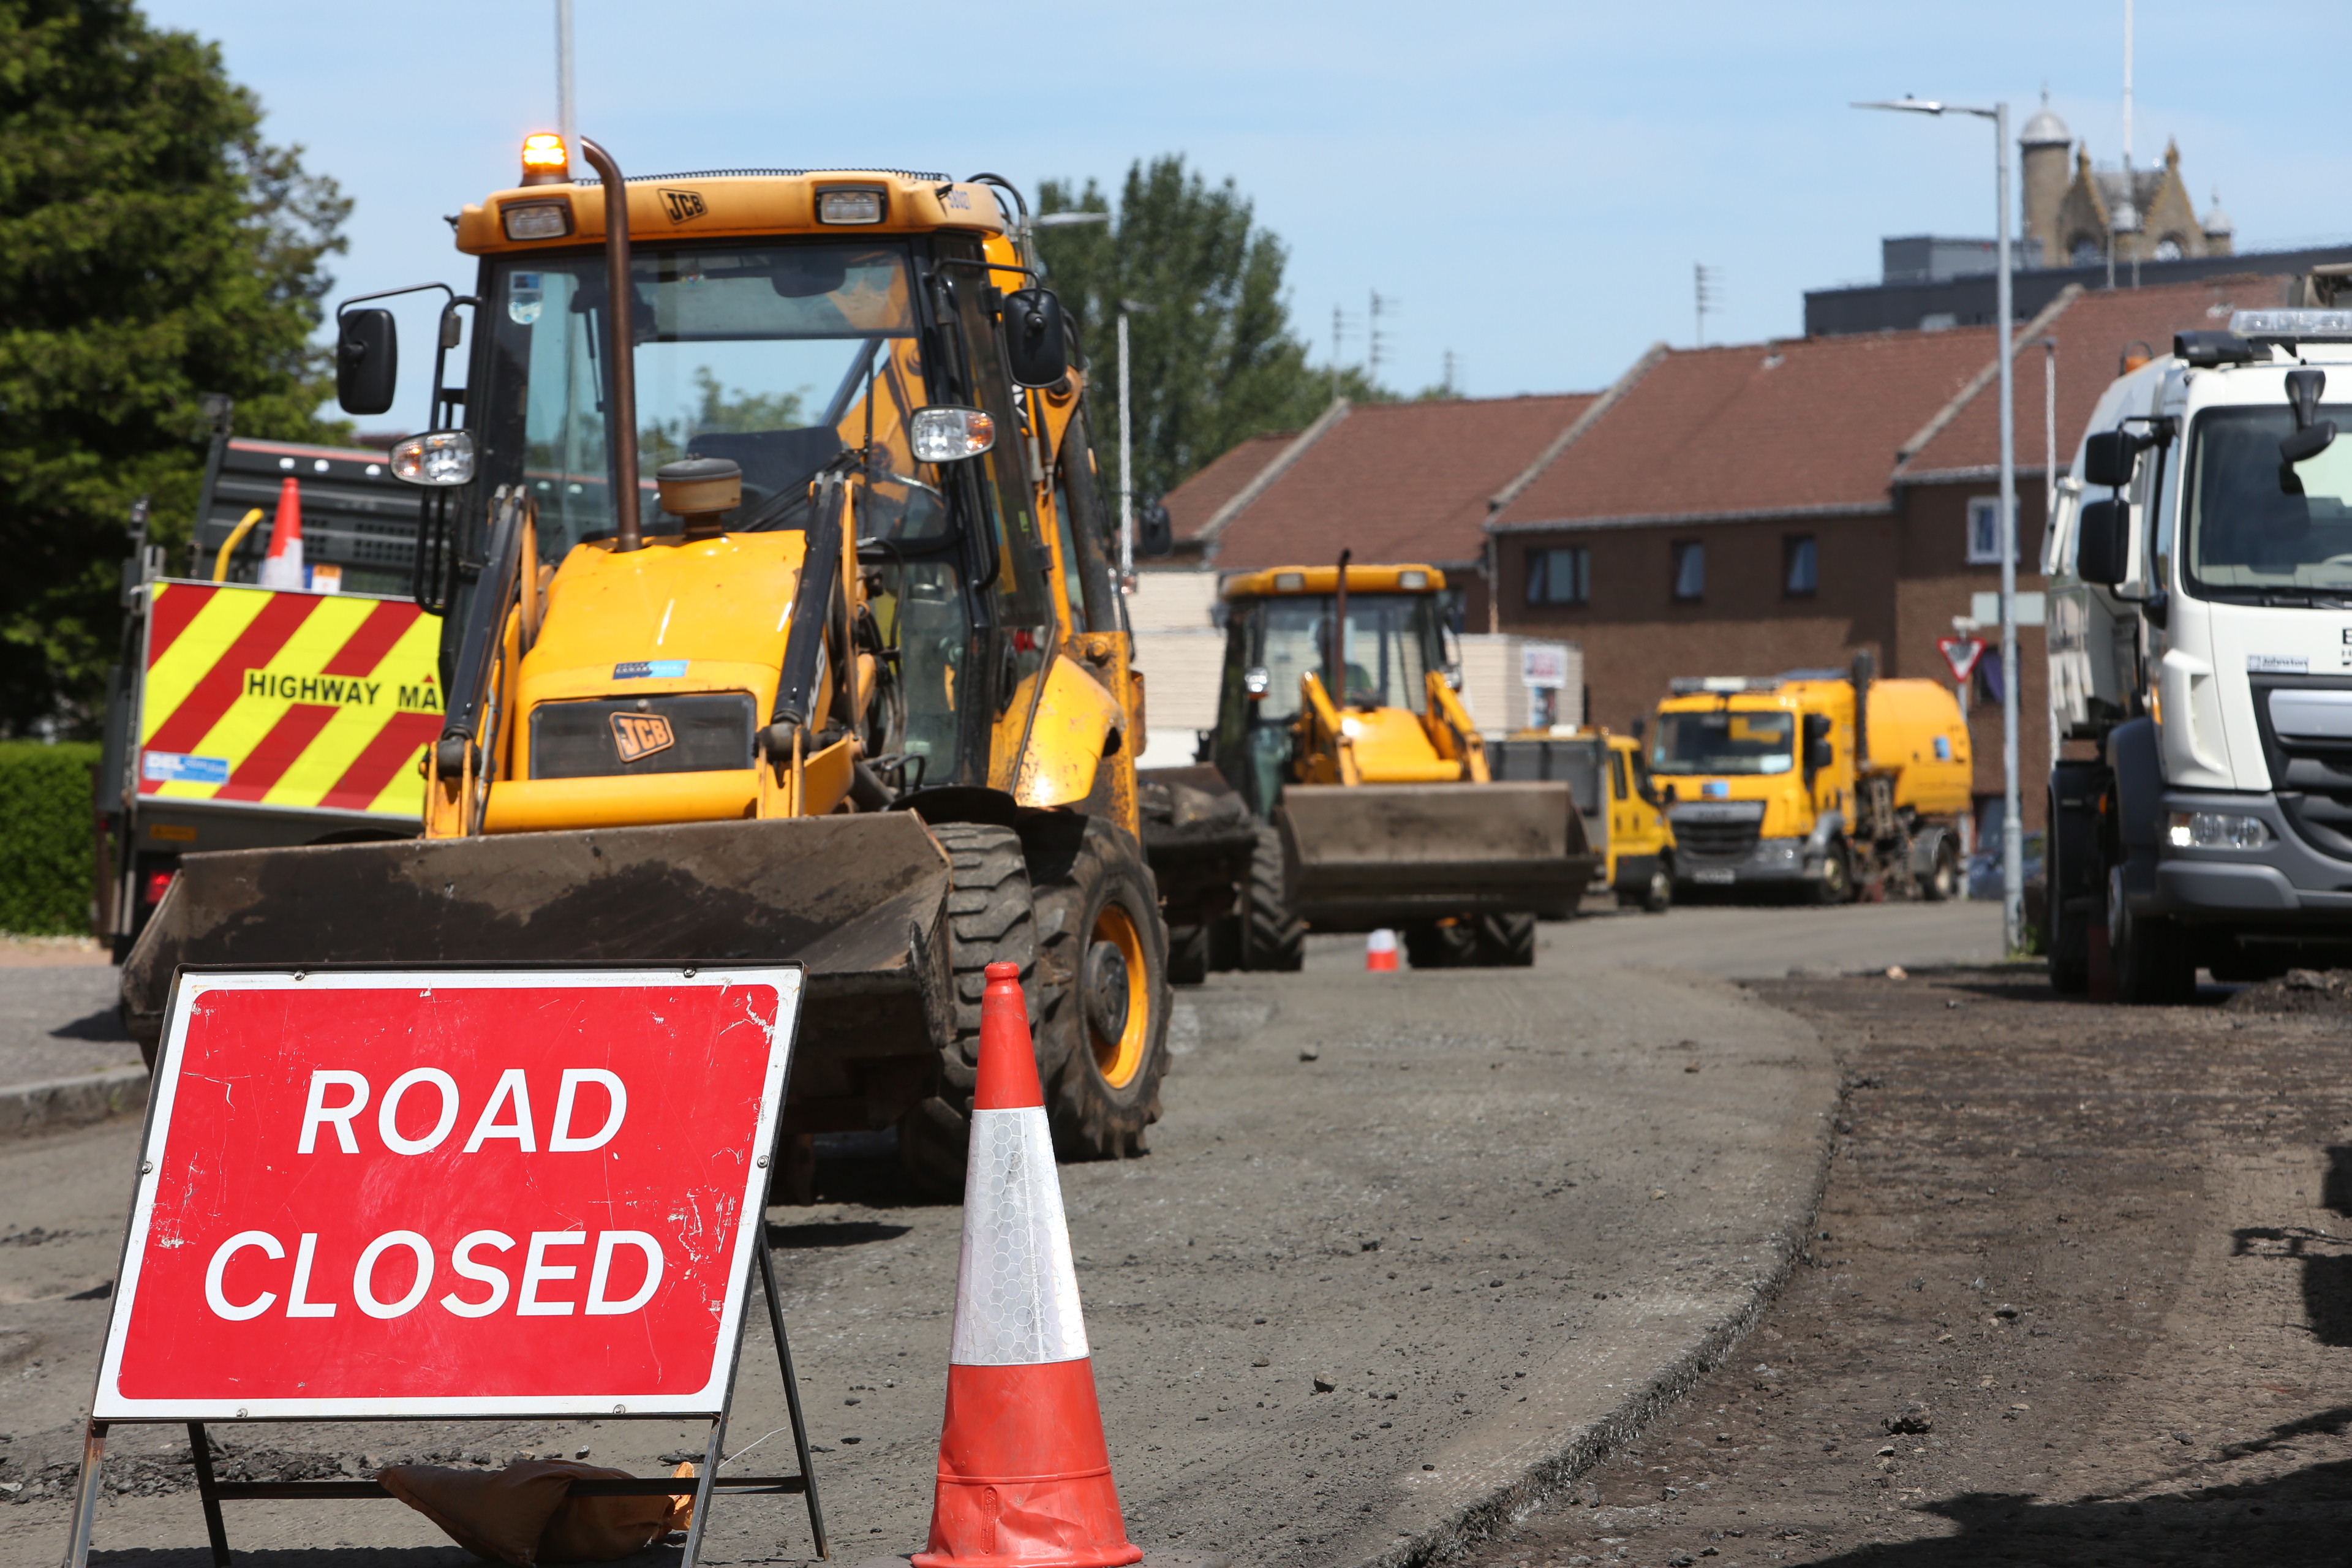 Roadwords with road closed sign and resurfacing equipment and vehicles. 